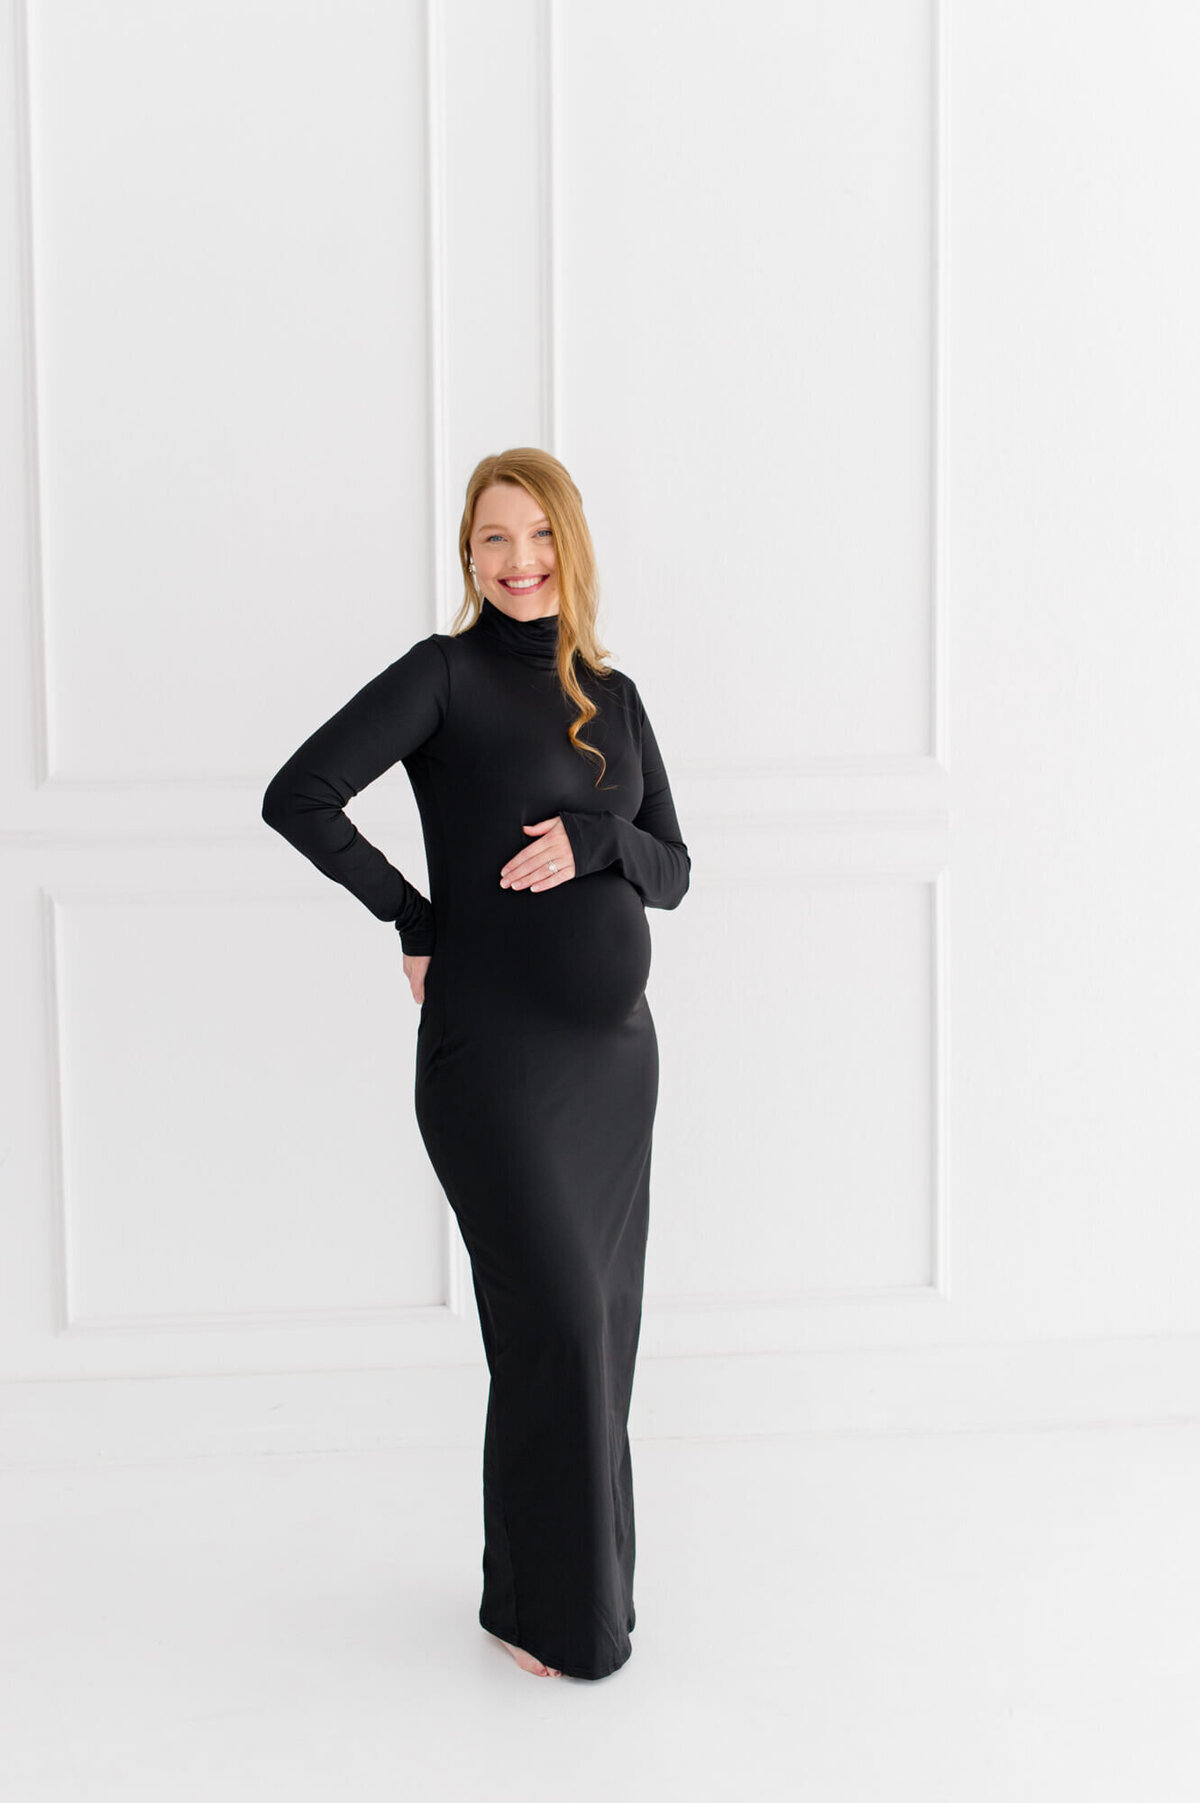 Orlando maternity photographer captured a pregnant mother holding her belly in the studio wearing an elegant black dress